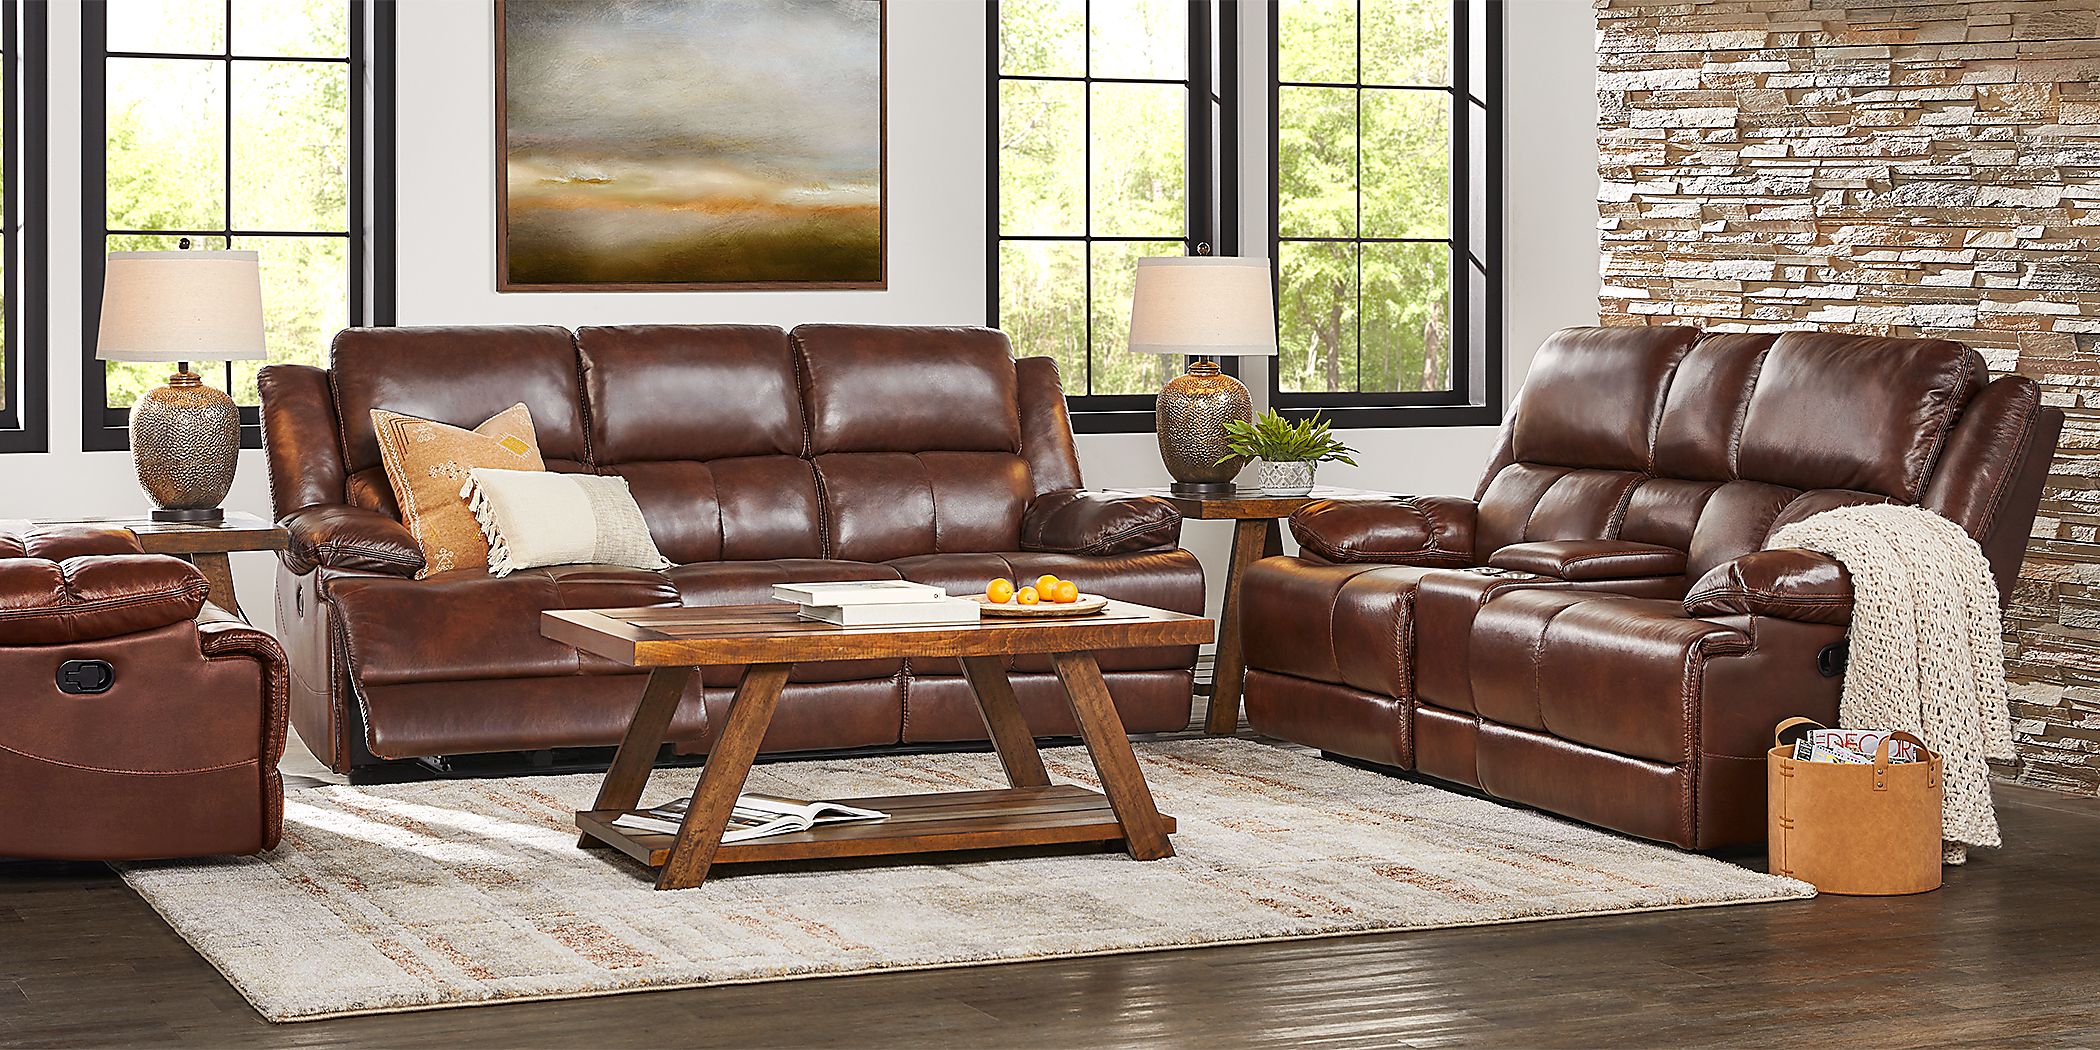 Rooms To Go Montefano Brown Leather 5 Pc Reclining Living Room